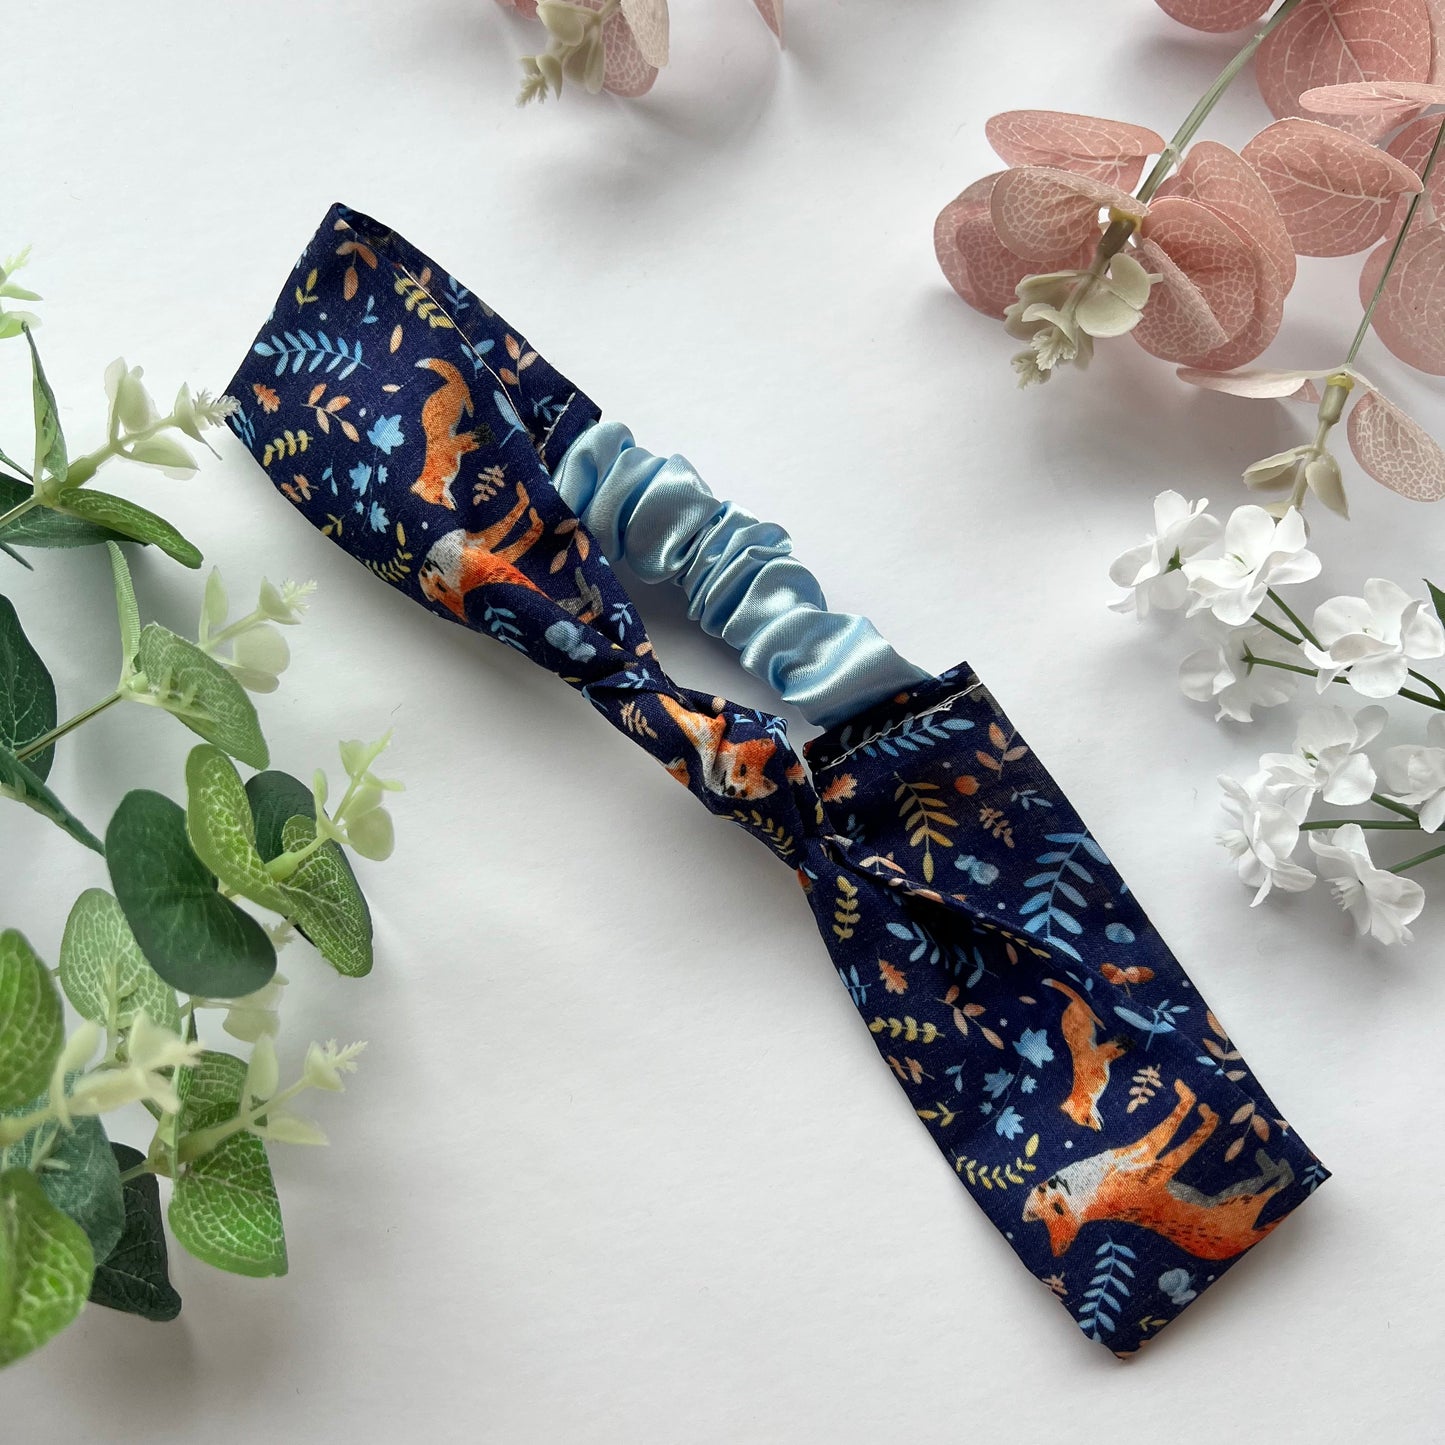 If you are looking for where to buy hair accessories, these animal headbands are ideal for a gift. This fox pattern is shown on the headband here, as a great fox gift idea.